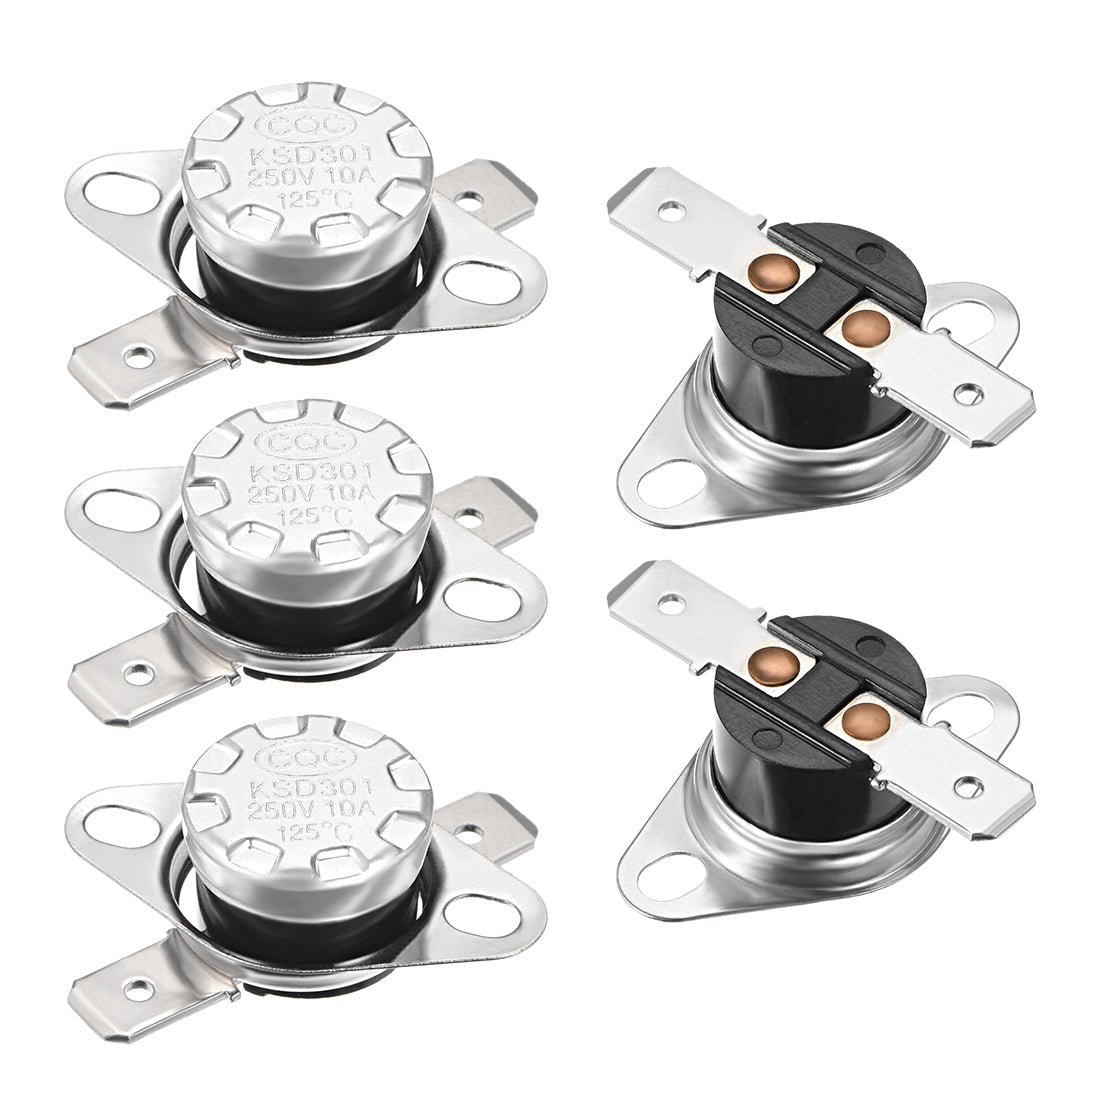 uxcell Uxcell Temperature Control Switch , Thermostat , KSD301 125°C , 10A , Normally Closed N.C 6.3mm Pin 5pcs